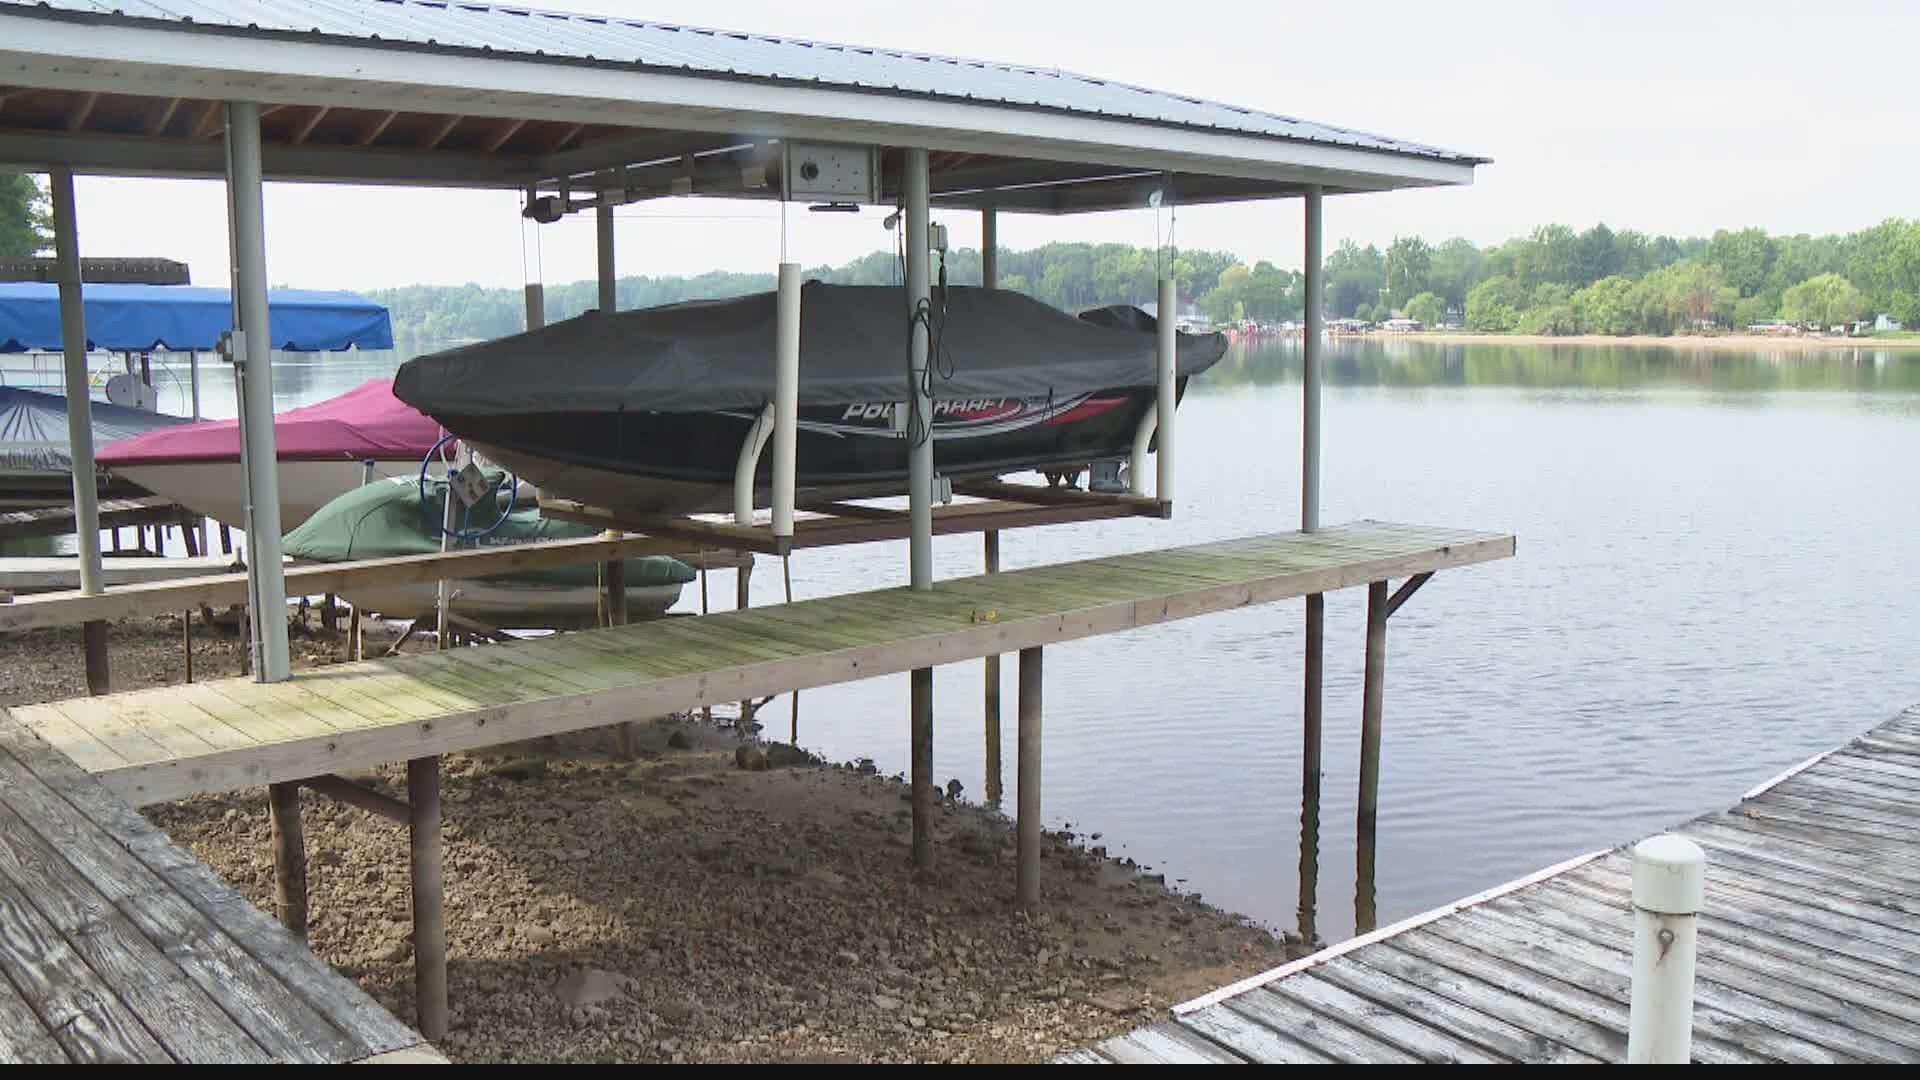 A popular Indiana lake is draining by the day.
Locals say it's because of an effort by the government to save an endangered species.